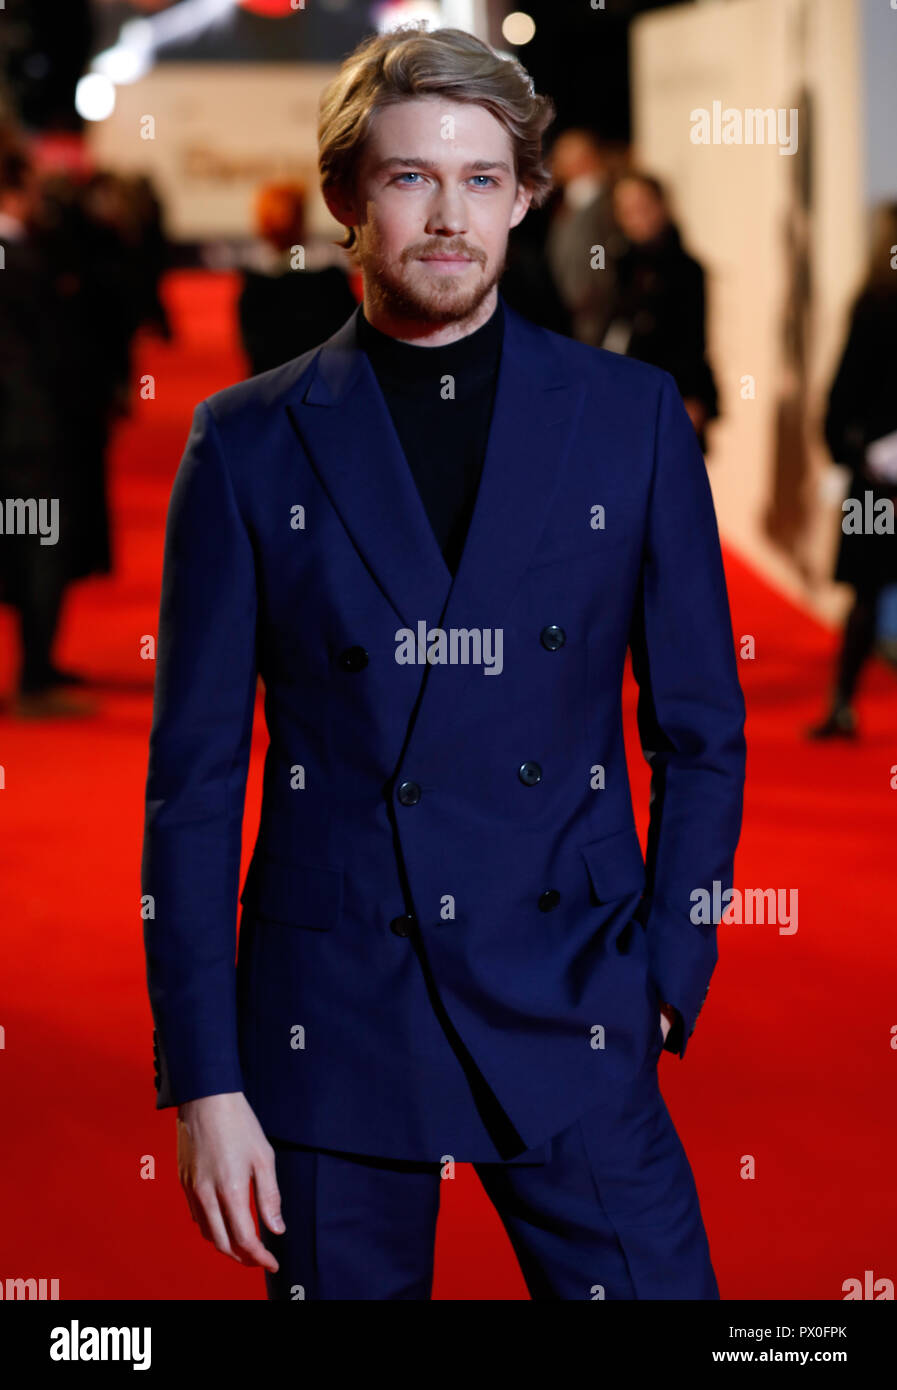 Joe Alwyn attending the UK premiere of The Favourite at the BFI Southbank for the 62nd BFI London Film Festival Stock Photo